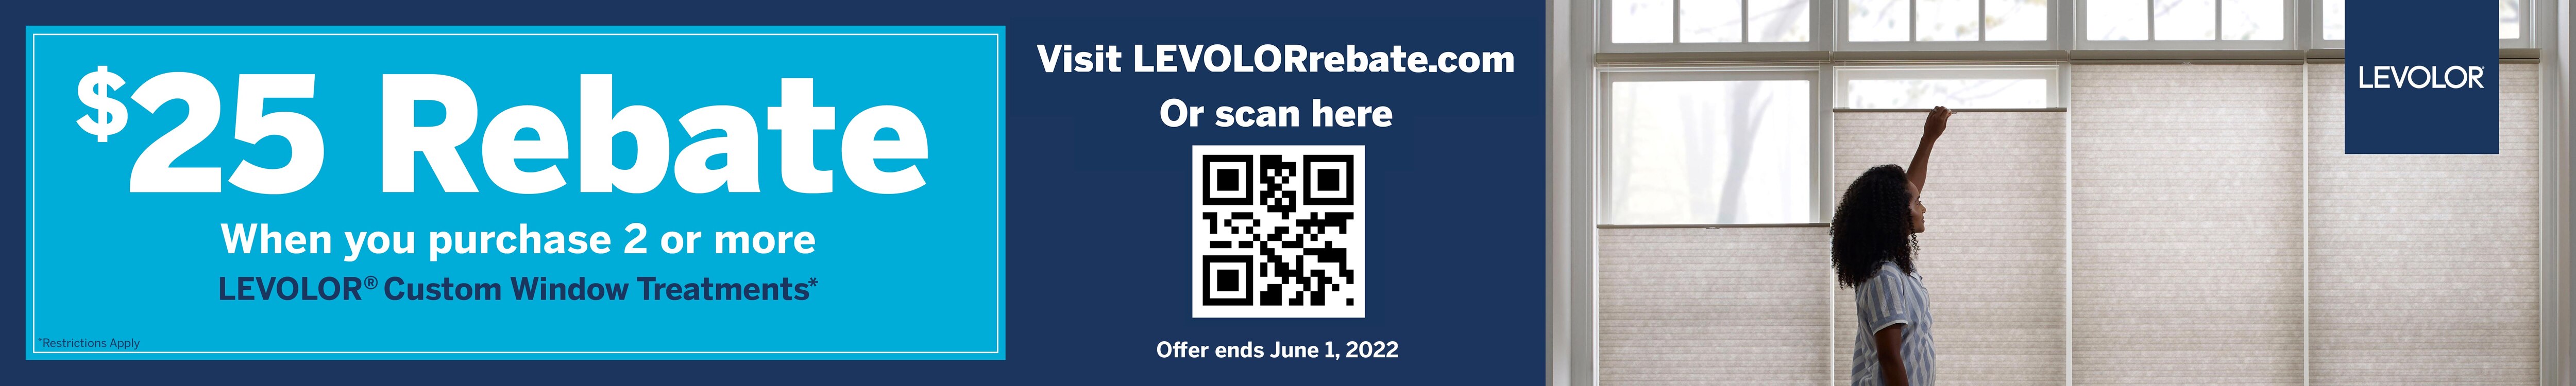 levolor is offering a $25 rebate to customers who buy 2+ levolor window treatments, see details at levolorrebate.com